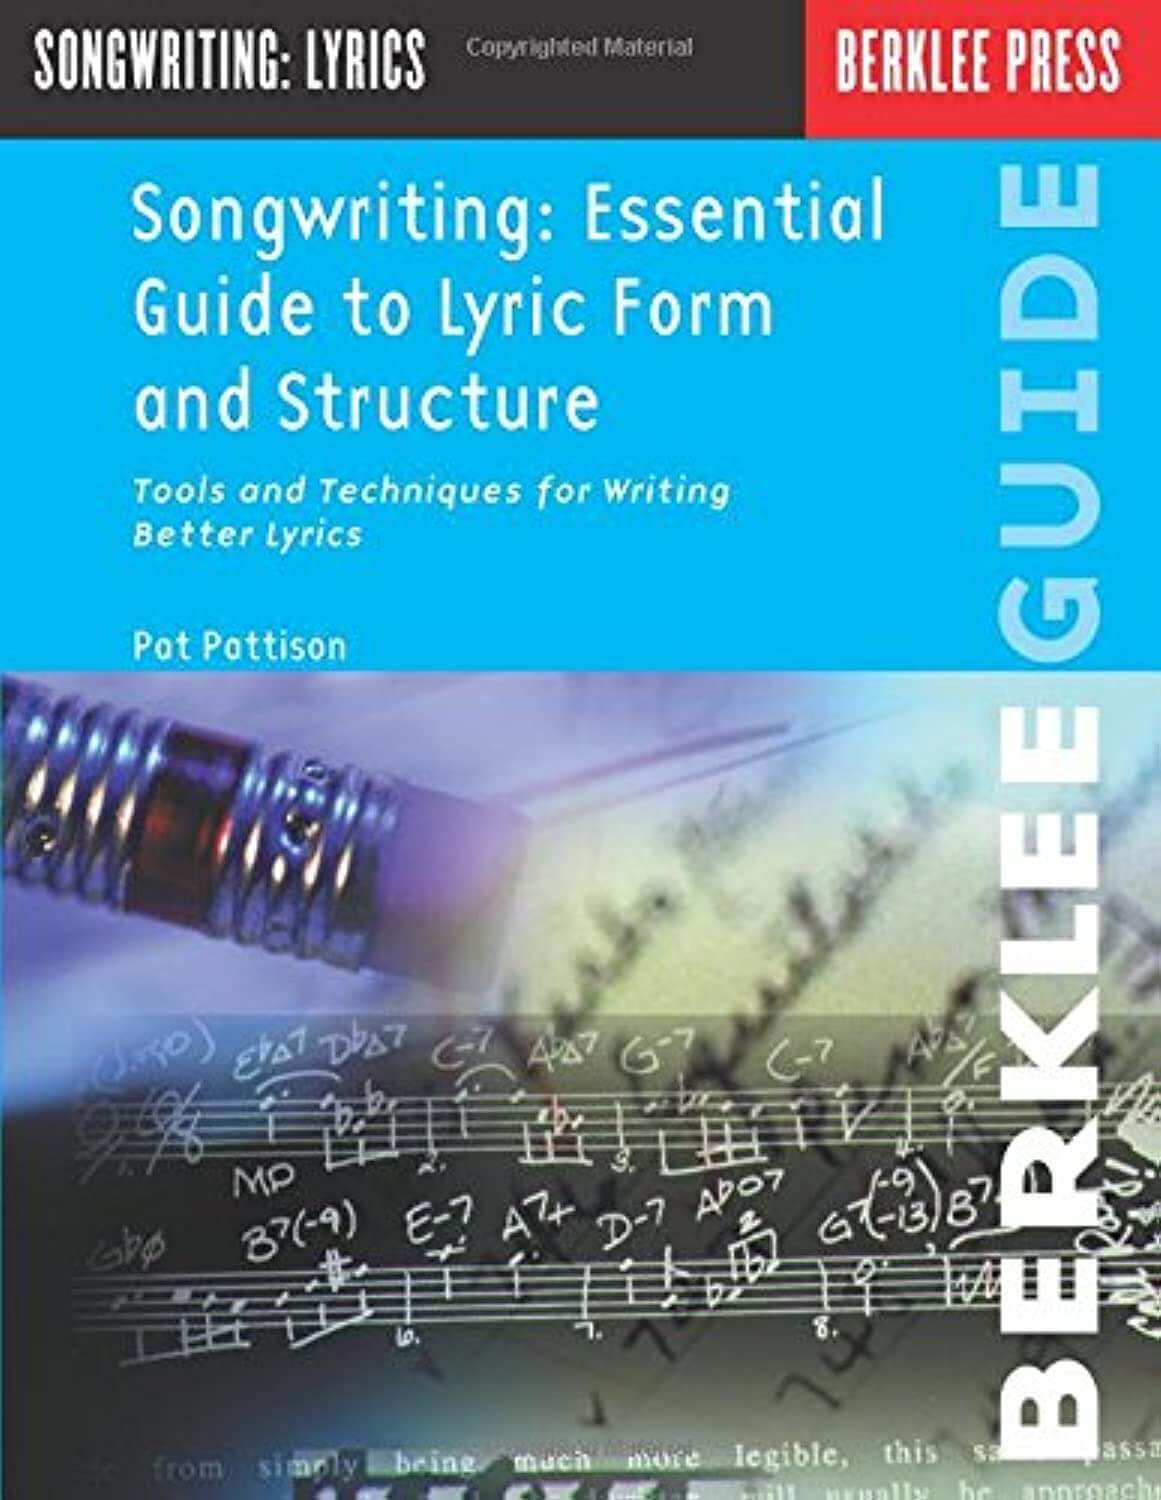 berklee lyric form and structure tools for rhyme